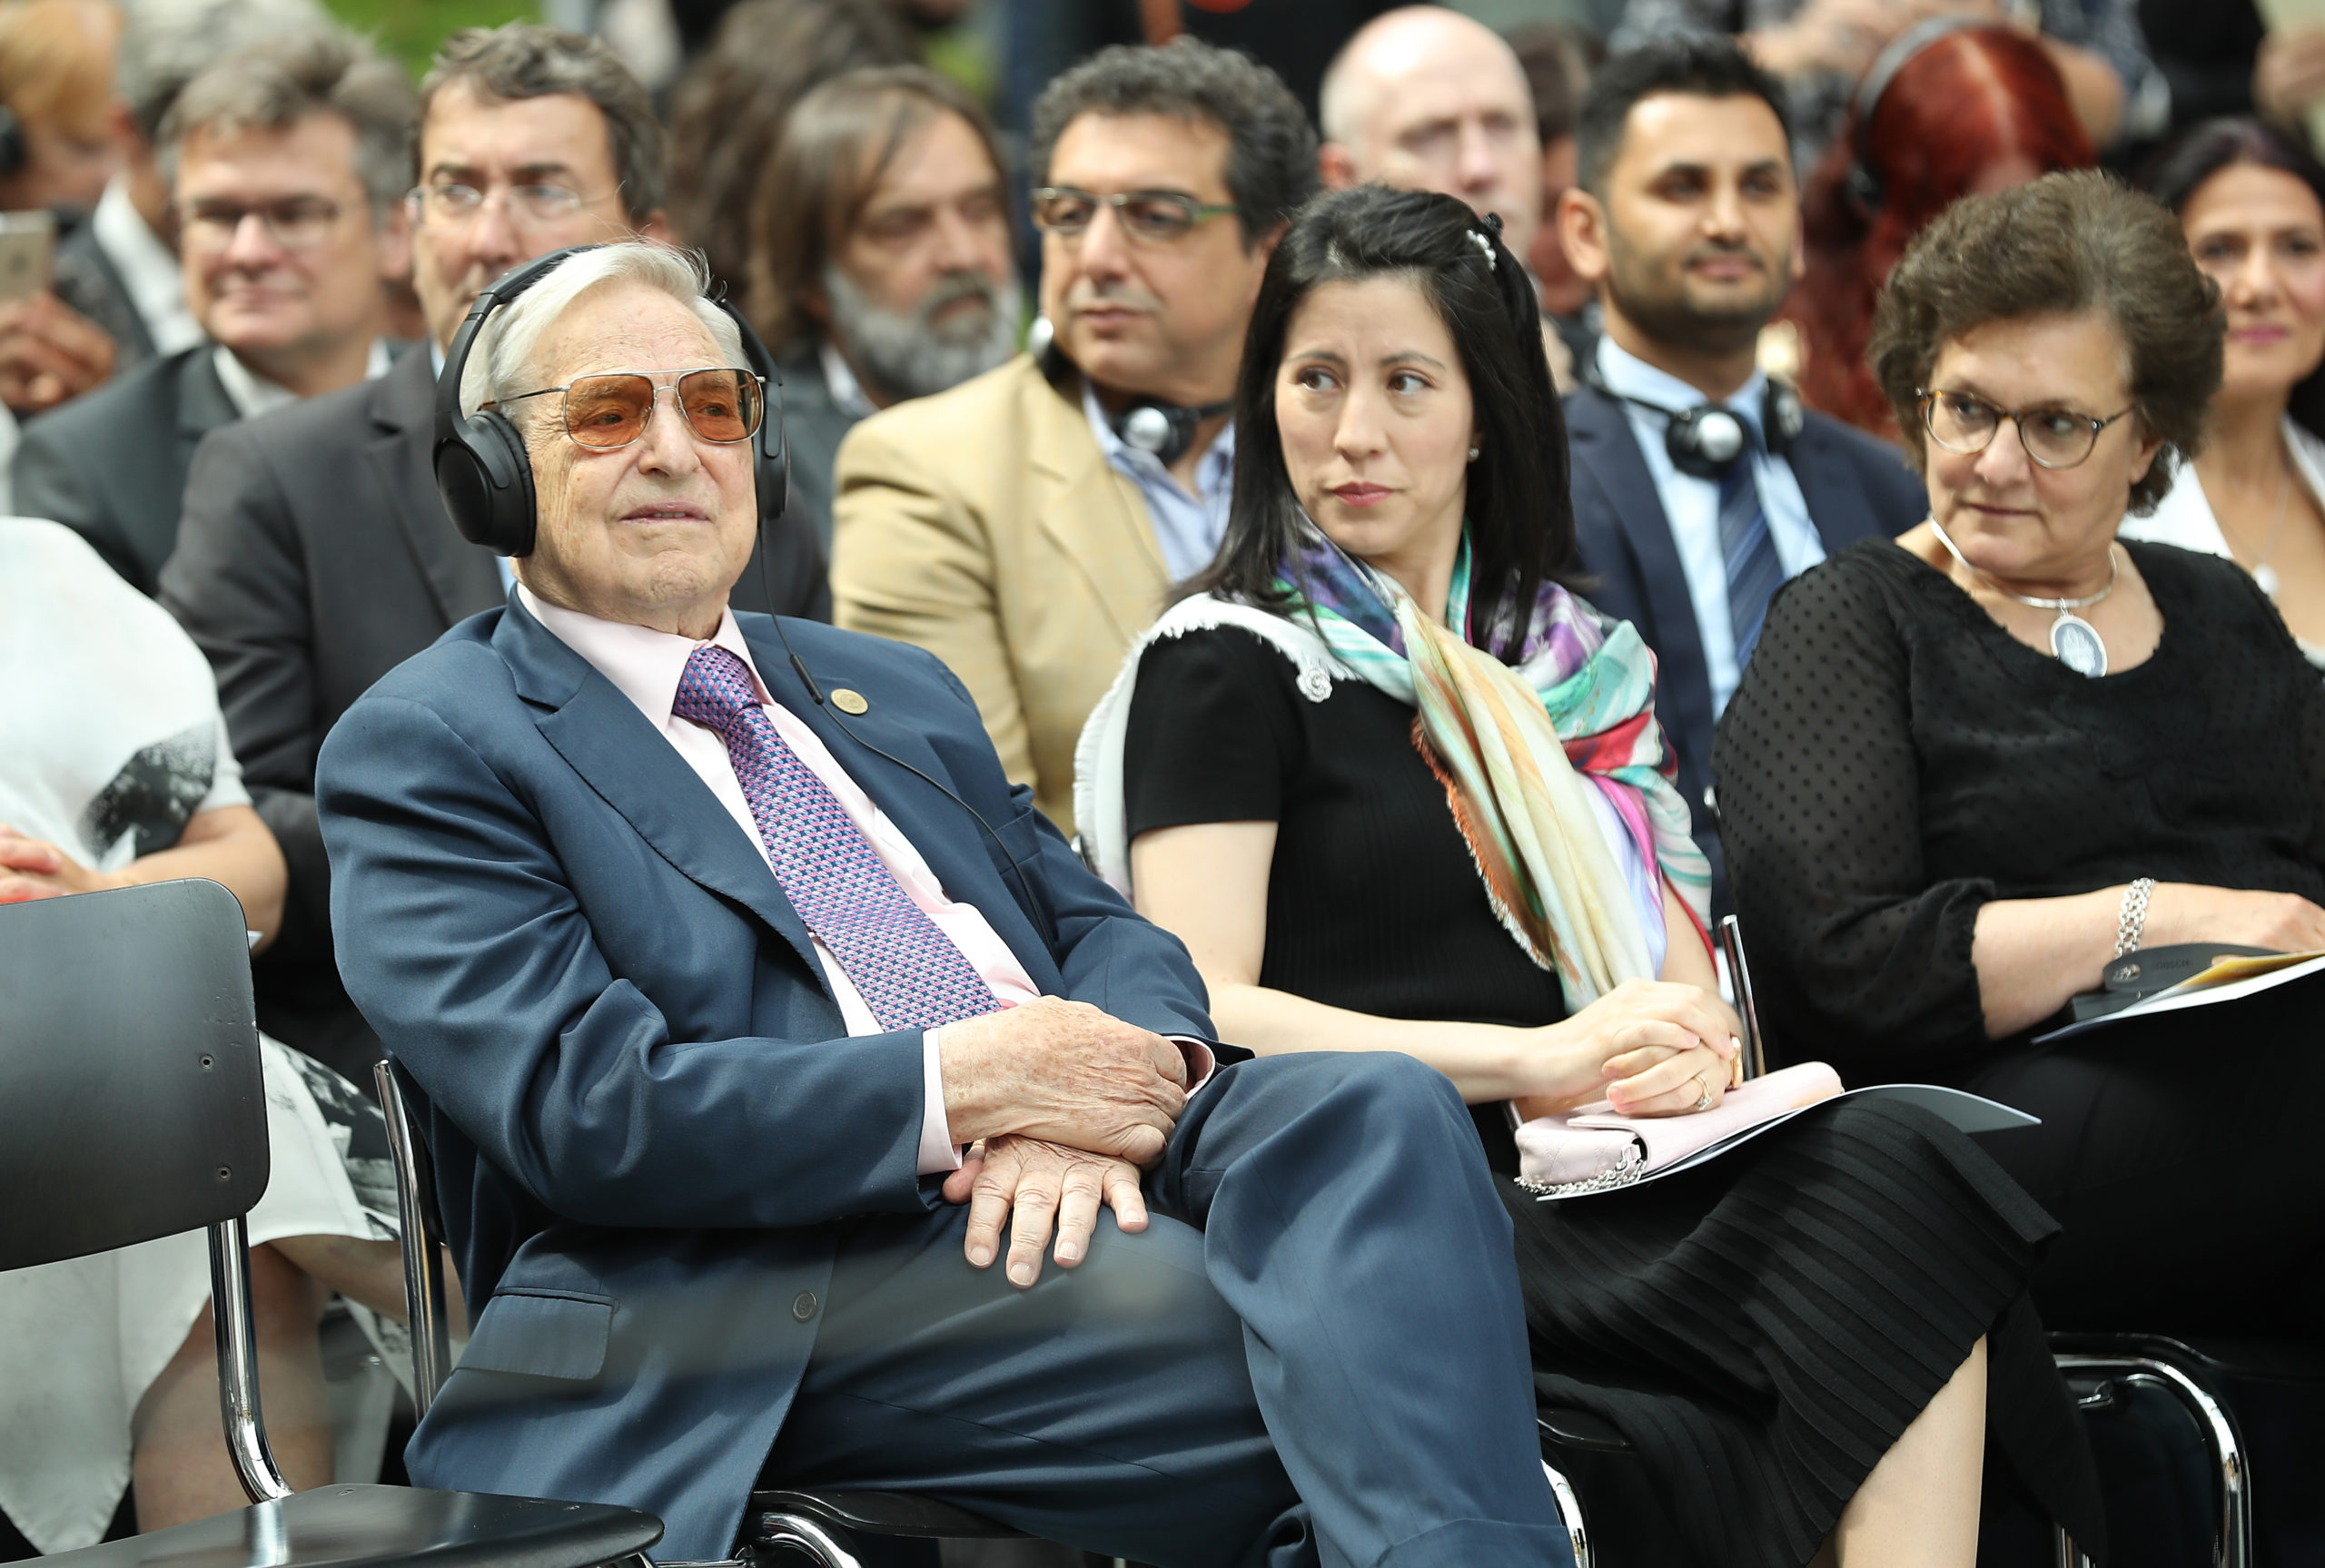 BERLIN, GERMANY - JUNE 08: Financier and philanthropist George Soros (L) and his wife Tamiko Bolton (C) attend the official opening of the European Roma Institute for Arts and Culture (ERIAC) at the German Foreign Ministry on June 8, 2017 in Berlin, Germany. Sean Gallup/Getty Images